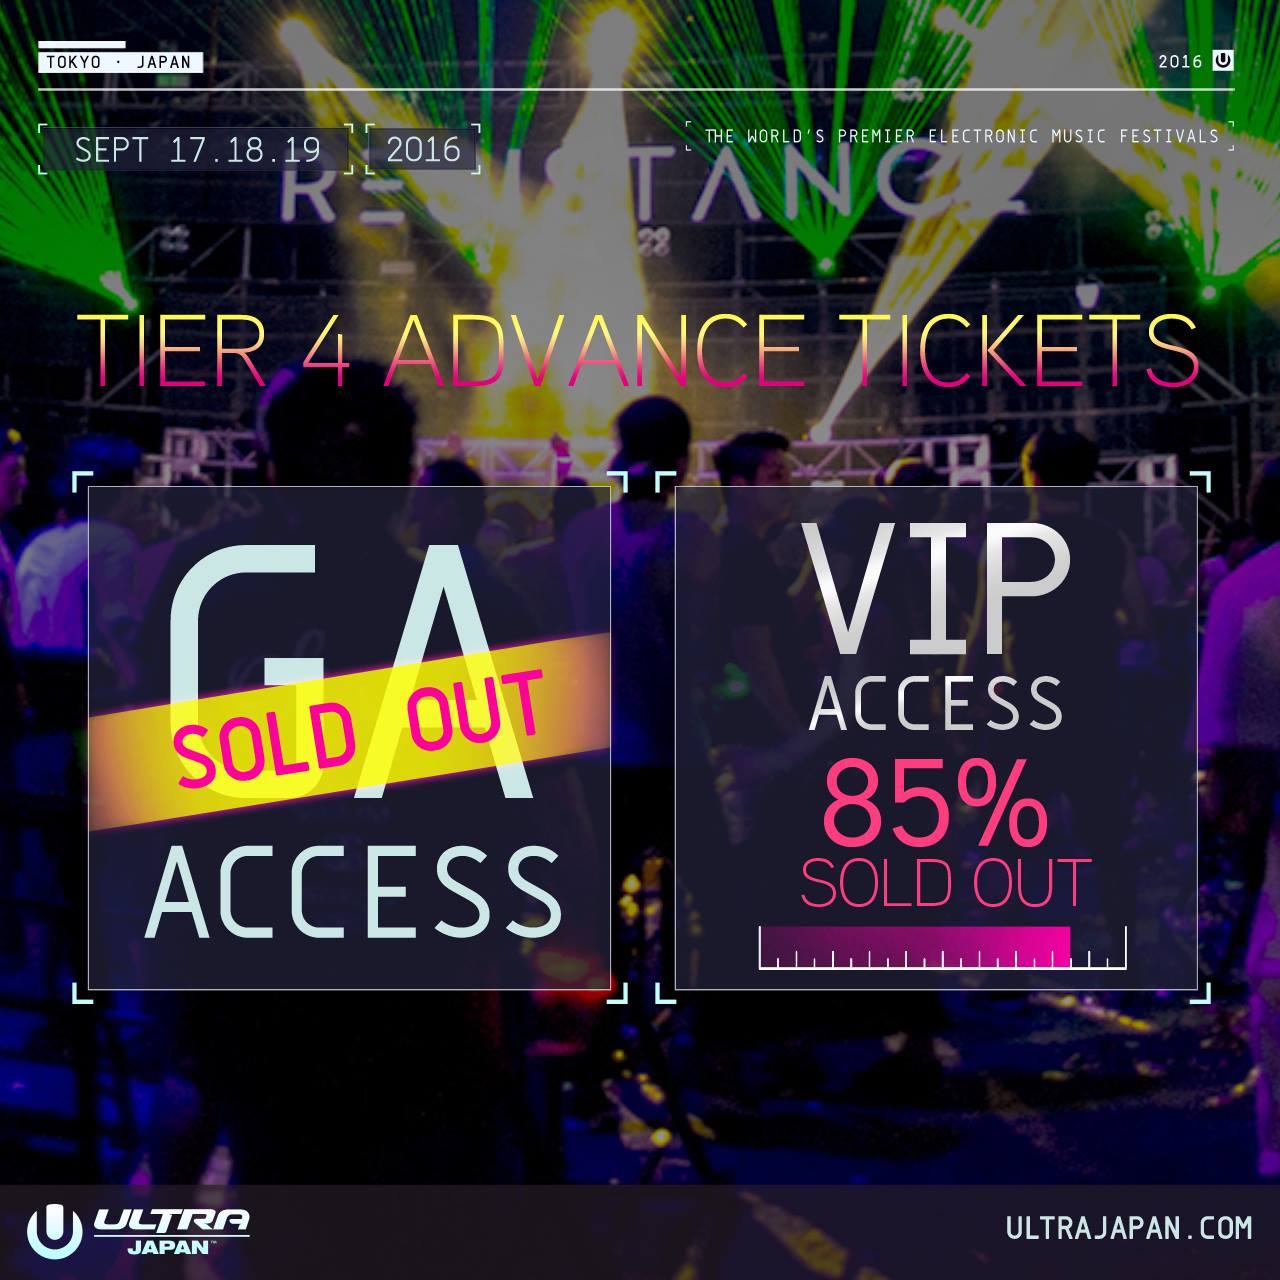 TIER4 GA TICKETS ALL SOLD OUT